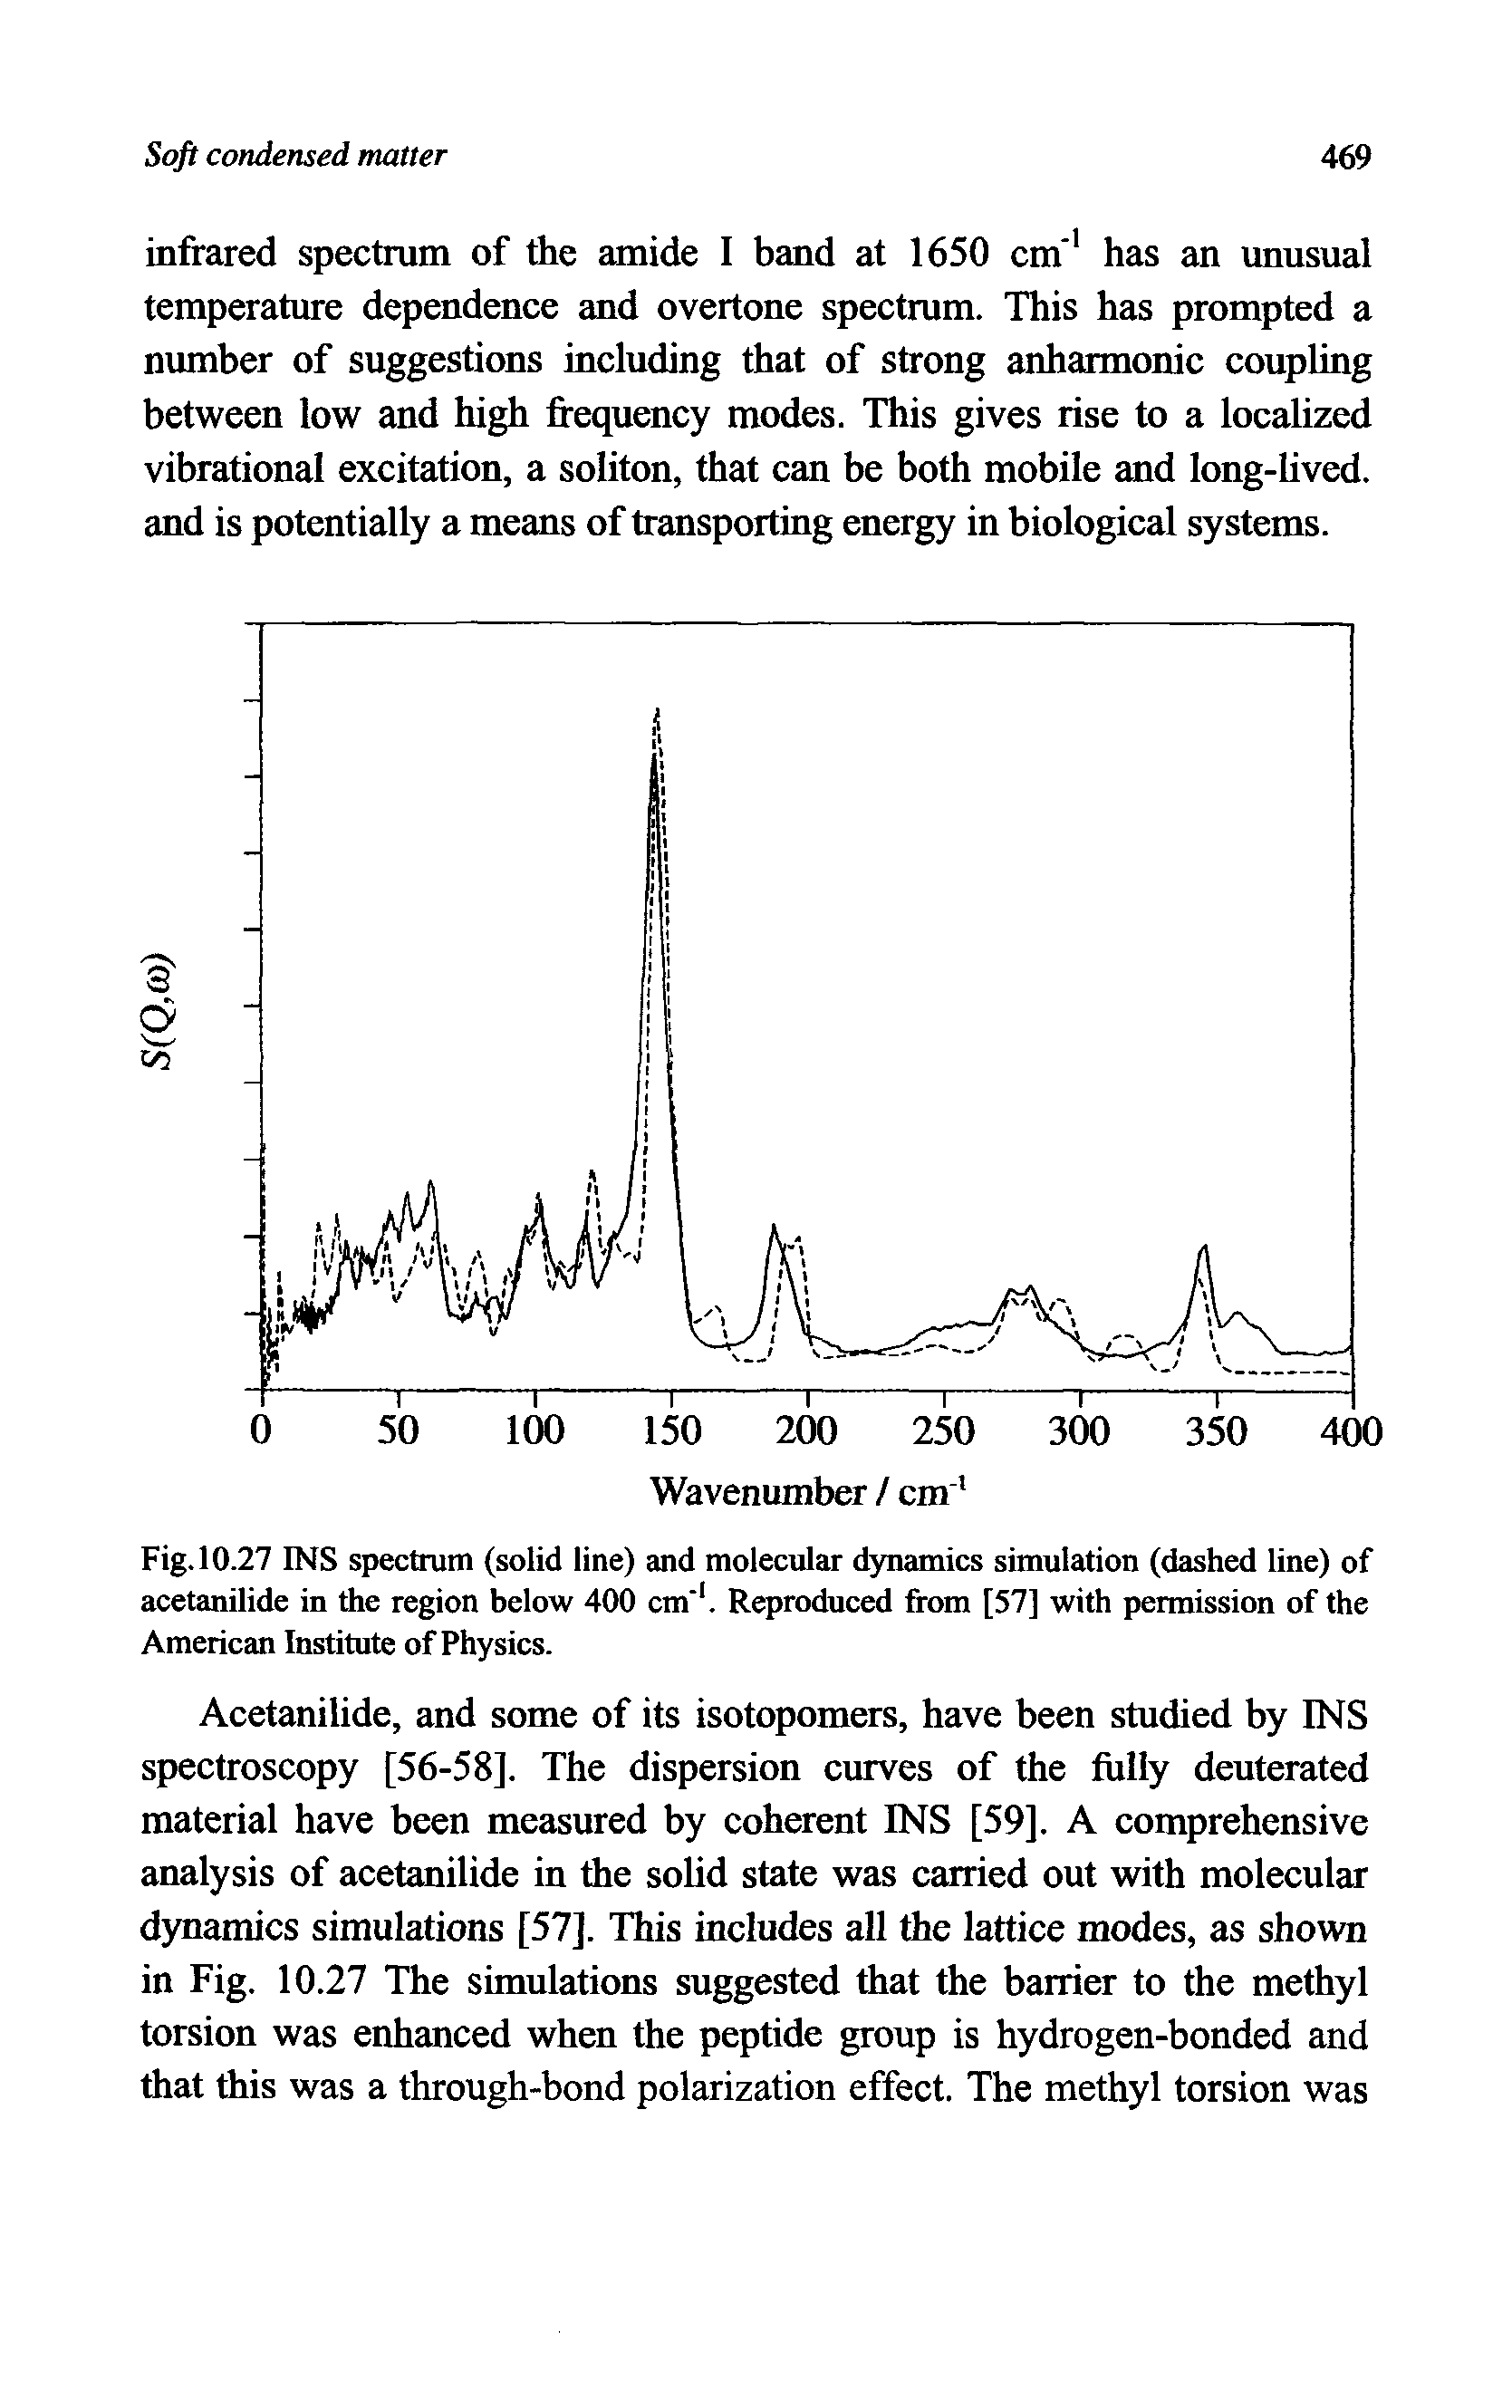 Fig.10.27 INS spectrum (solid line) and molecular dynamics simulation (dashed line) of acetanilide in the region below 400 cm. Reproduced from [57] with permission of the American Institute of Physics.